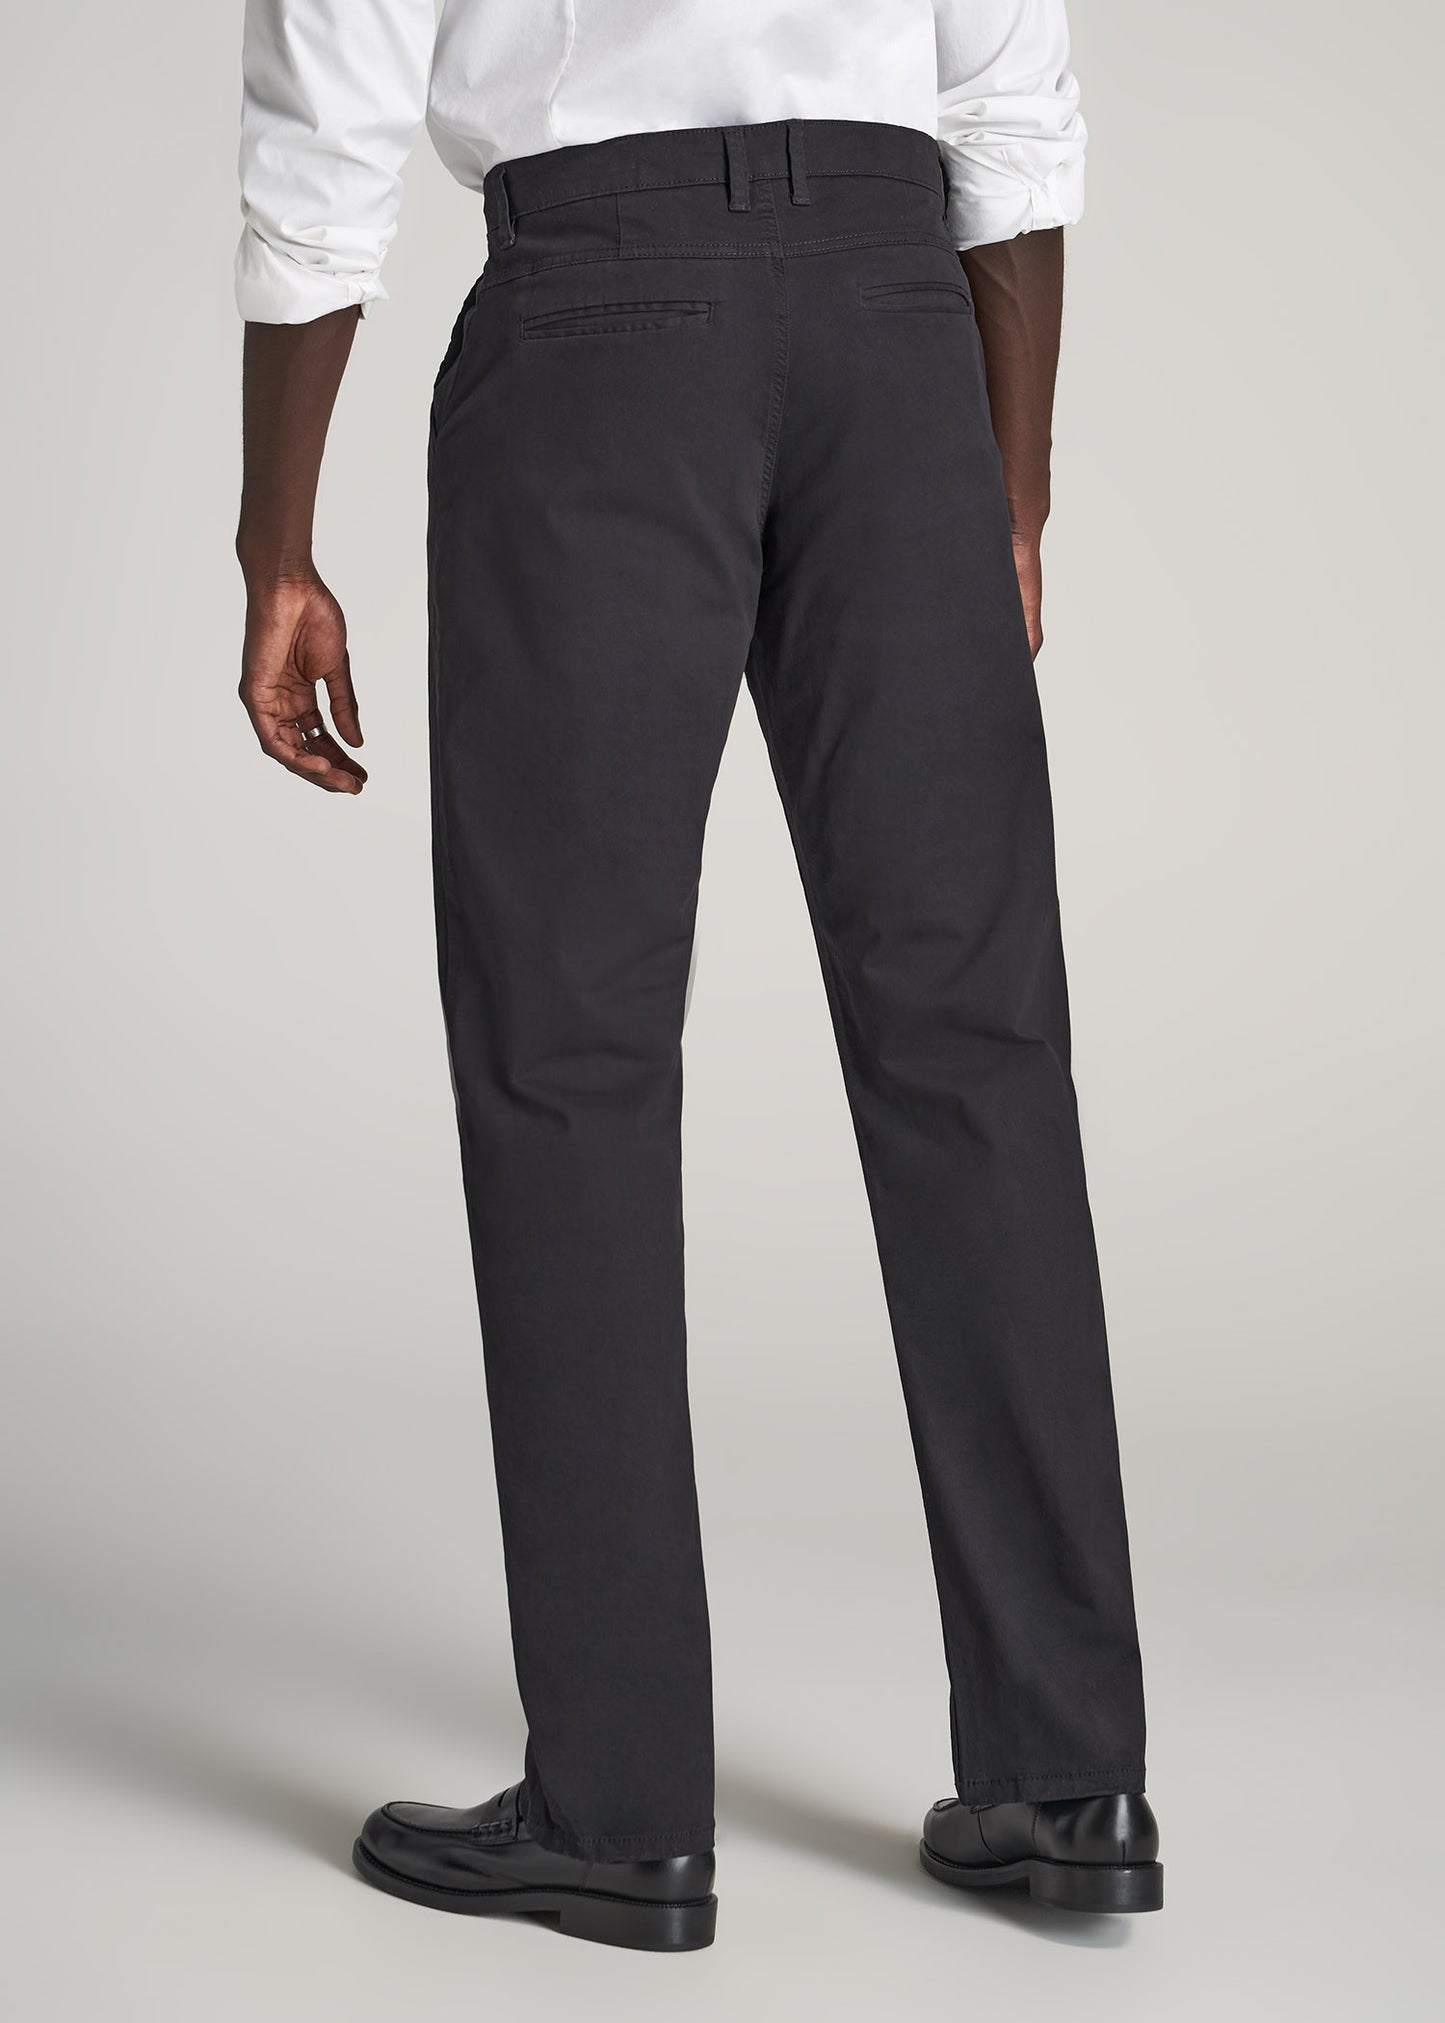 Chino Pants Meaning Outlet - www.illva.com 1693156430